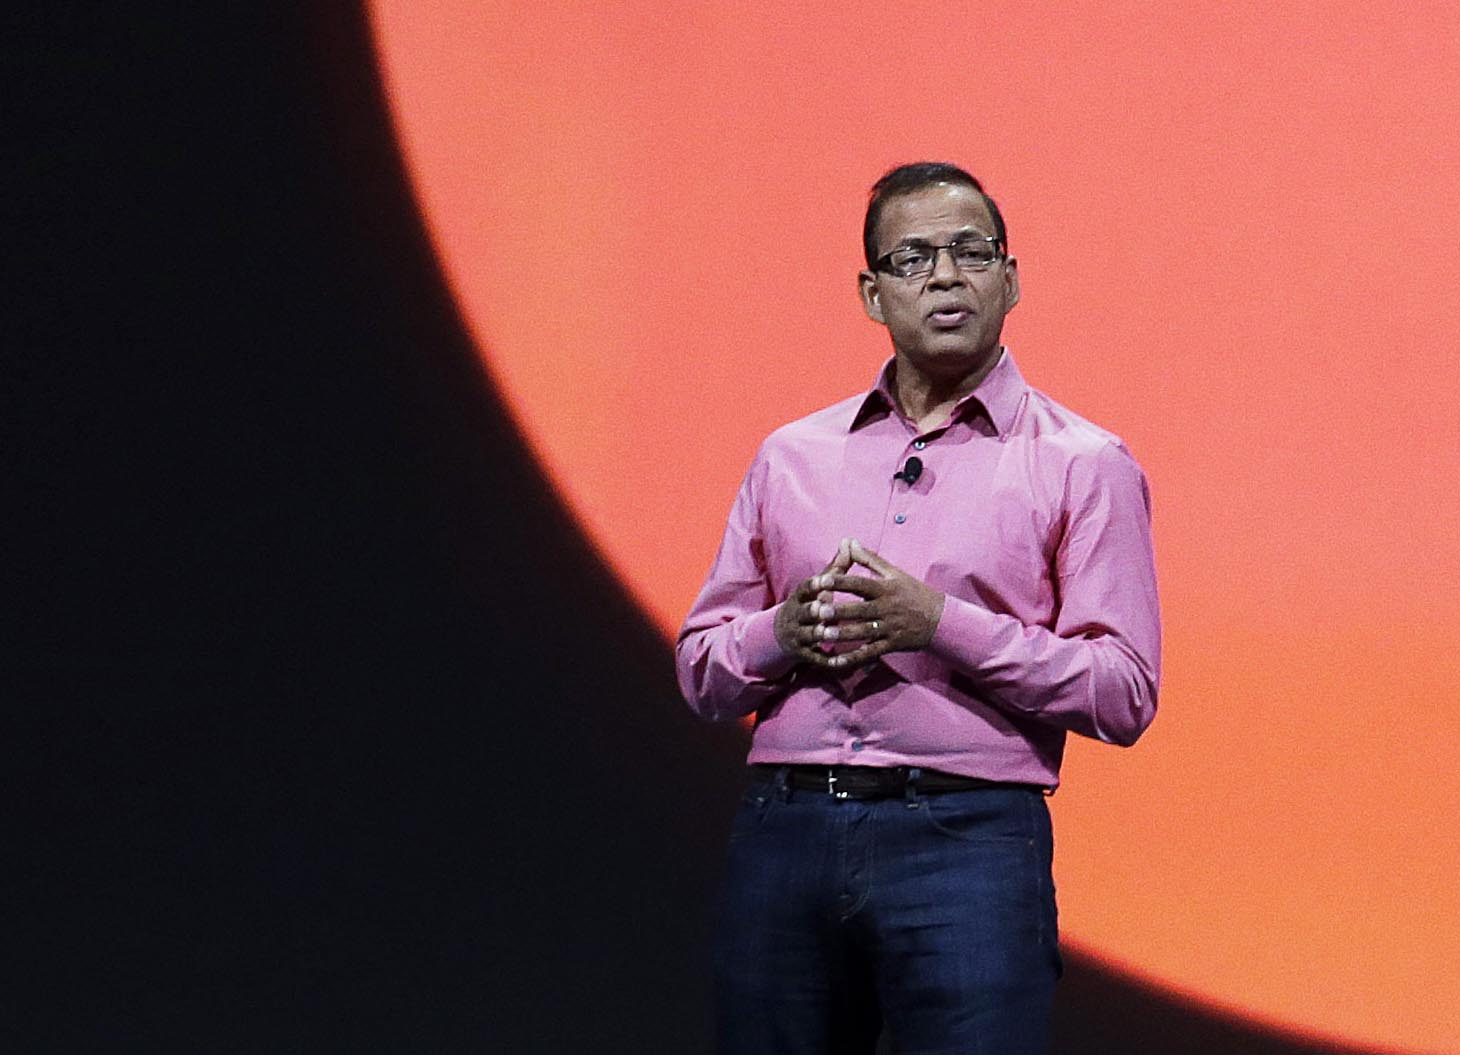 FILE - In this May 15, 2013, file photo, Amit Singhal, senior vice president and software engineer at Google Inc., speaks at Google I/O 2013 in San Francisco. Photo: AP